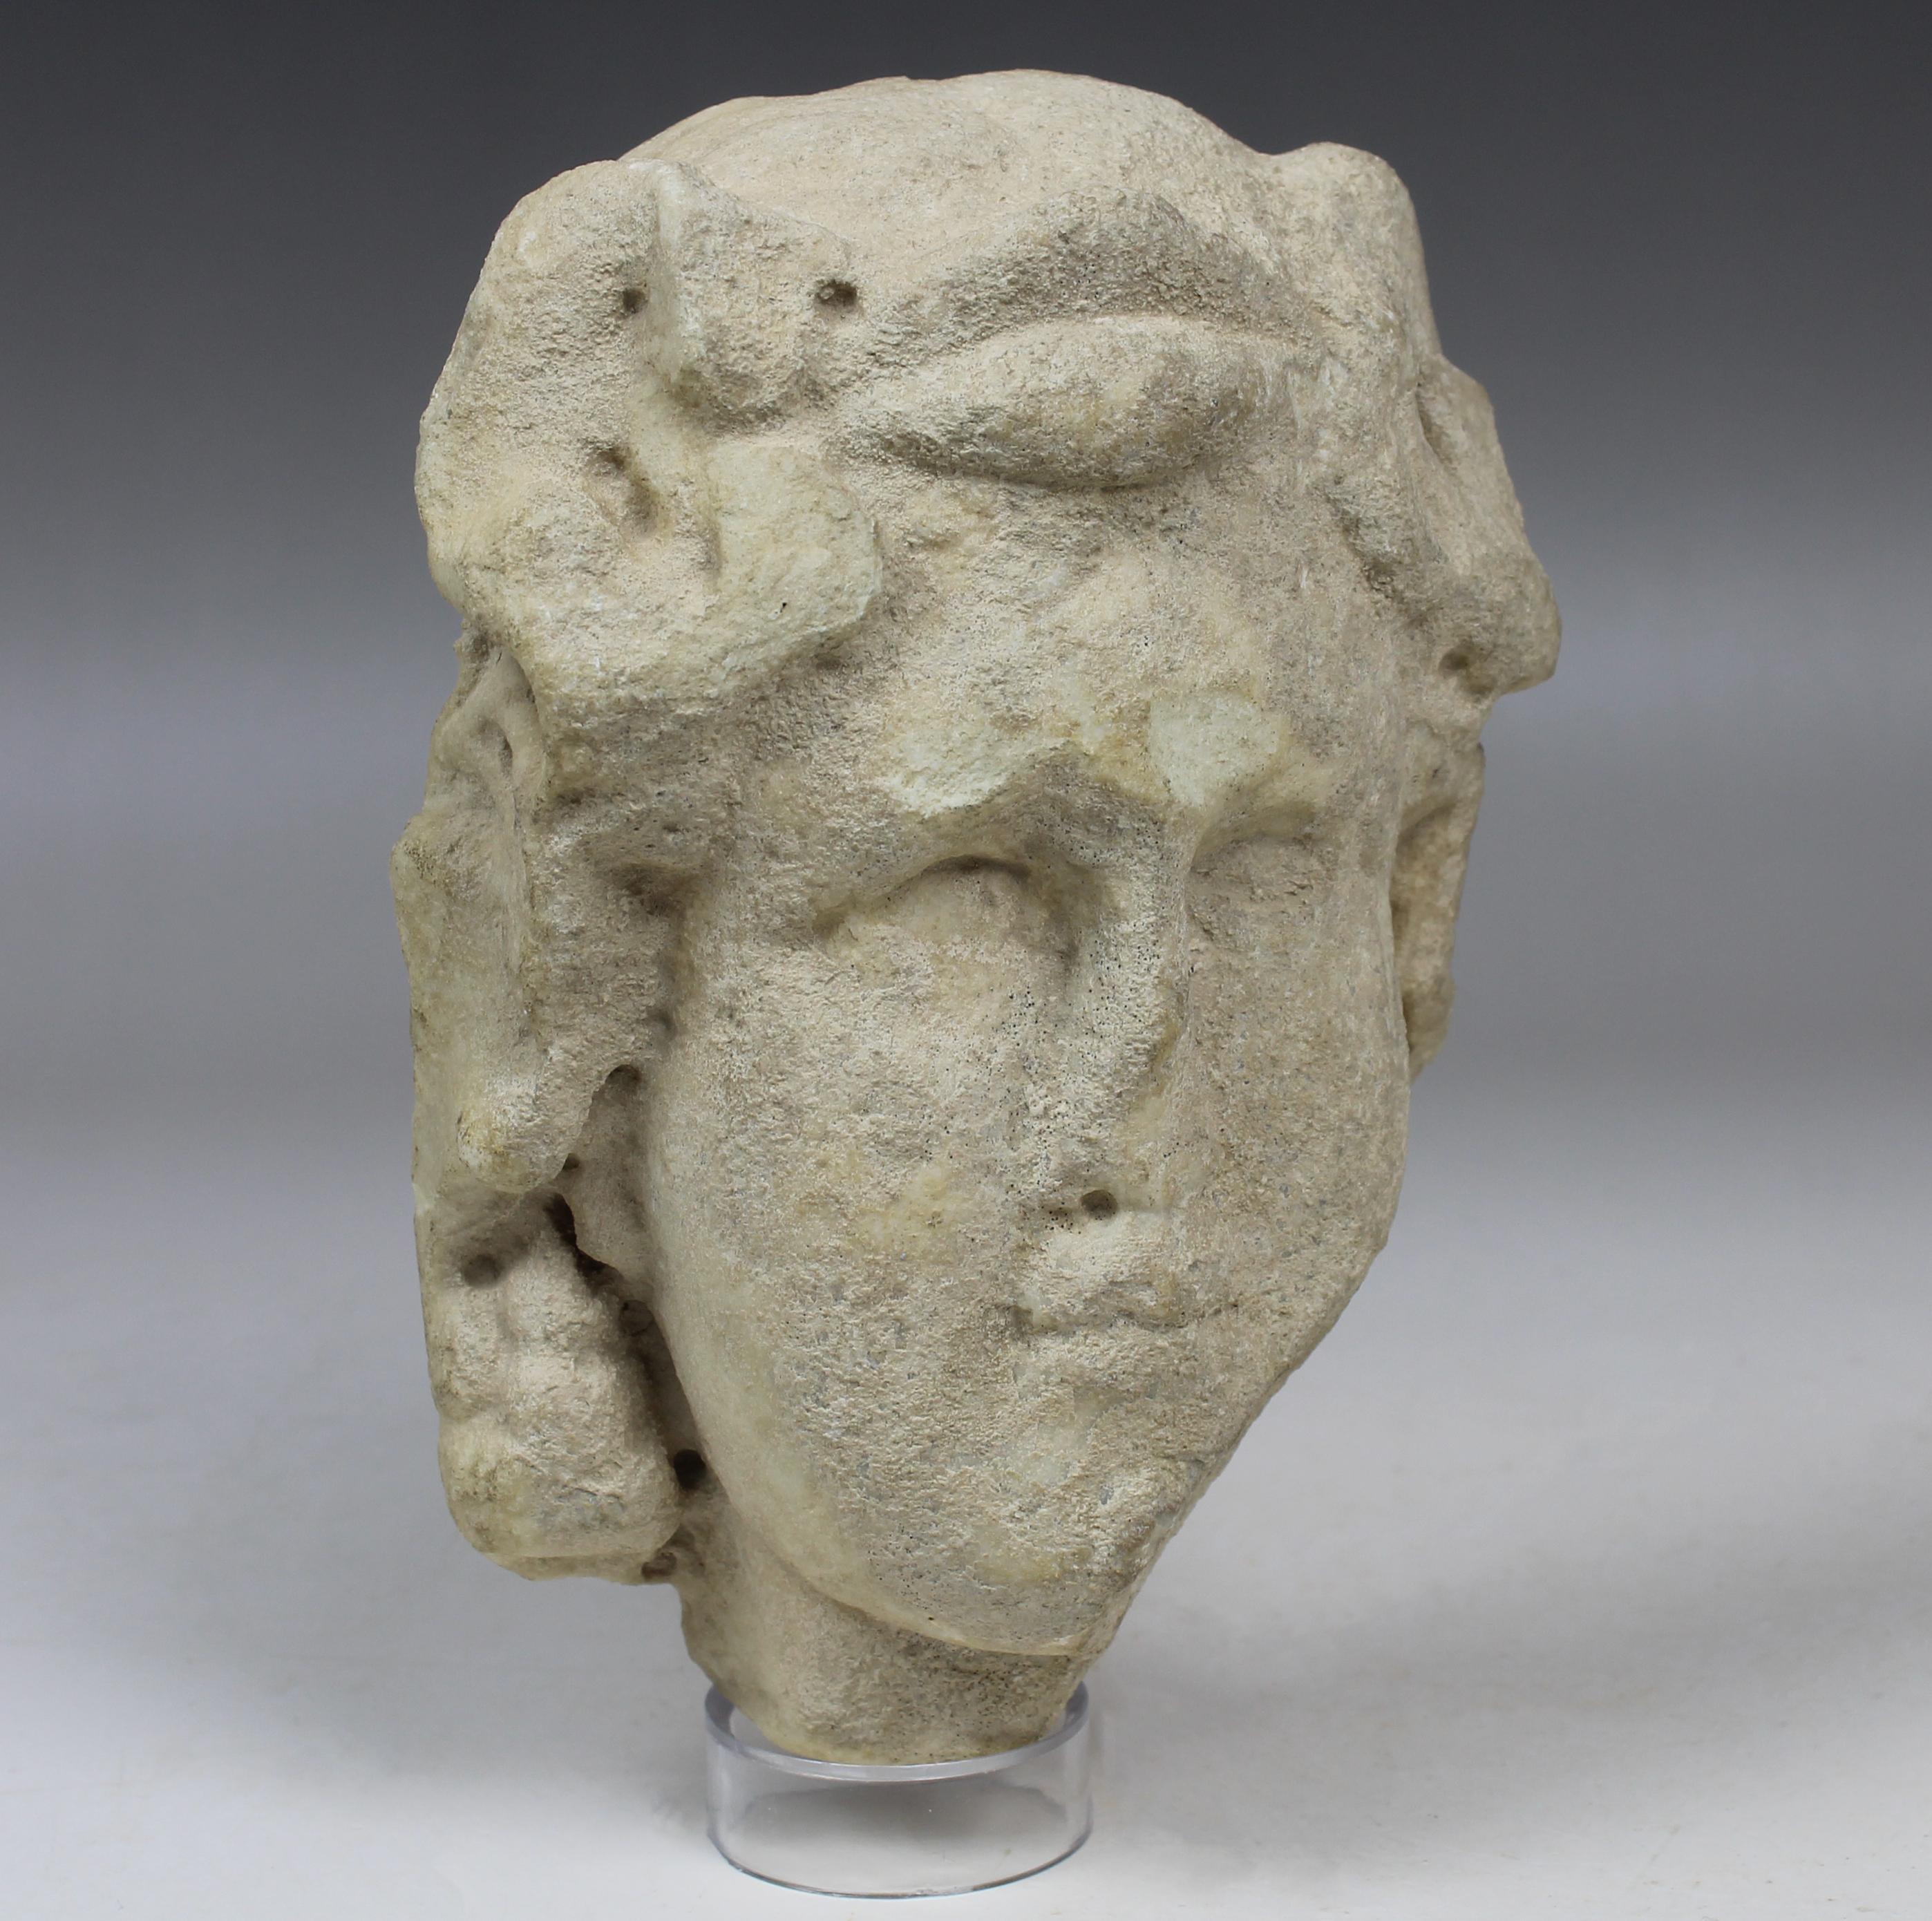 ITEM: Fragmentary herm of youthful Bacchus / Dionysos
MATERIAL: Marble
CULTURE: Roman
PERIOD: 2nd Century A.D
DIMENSIONS: 130 mm x 93 mm
CONDITION: Good condition
PROVENANCE: Ex Spanish private collection, acquired between 1980 – 2000

Comes with